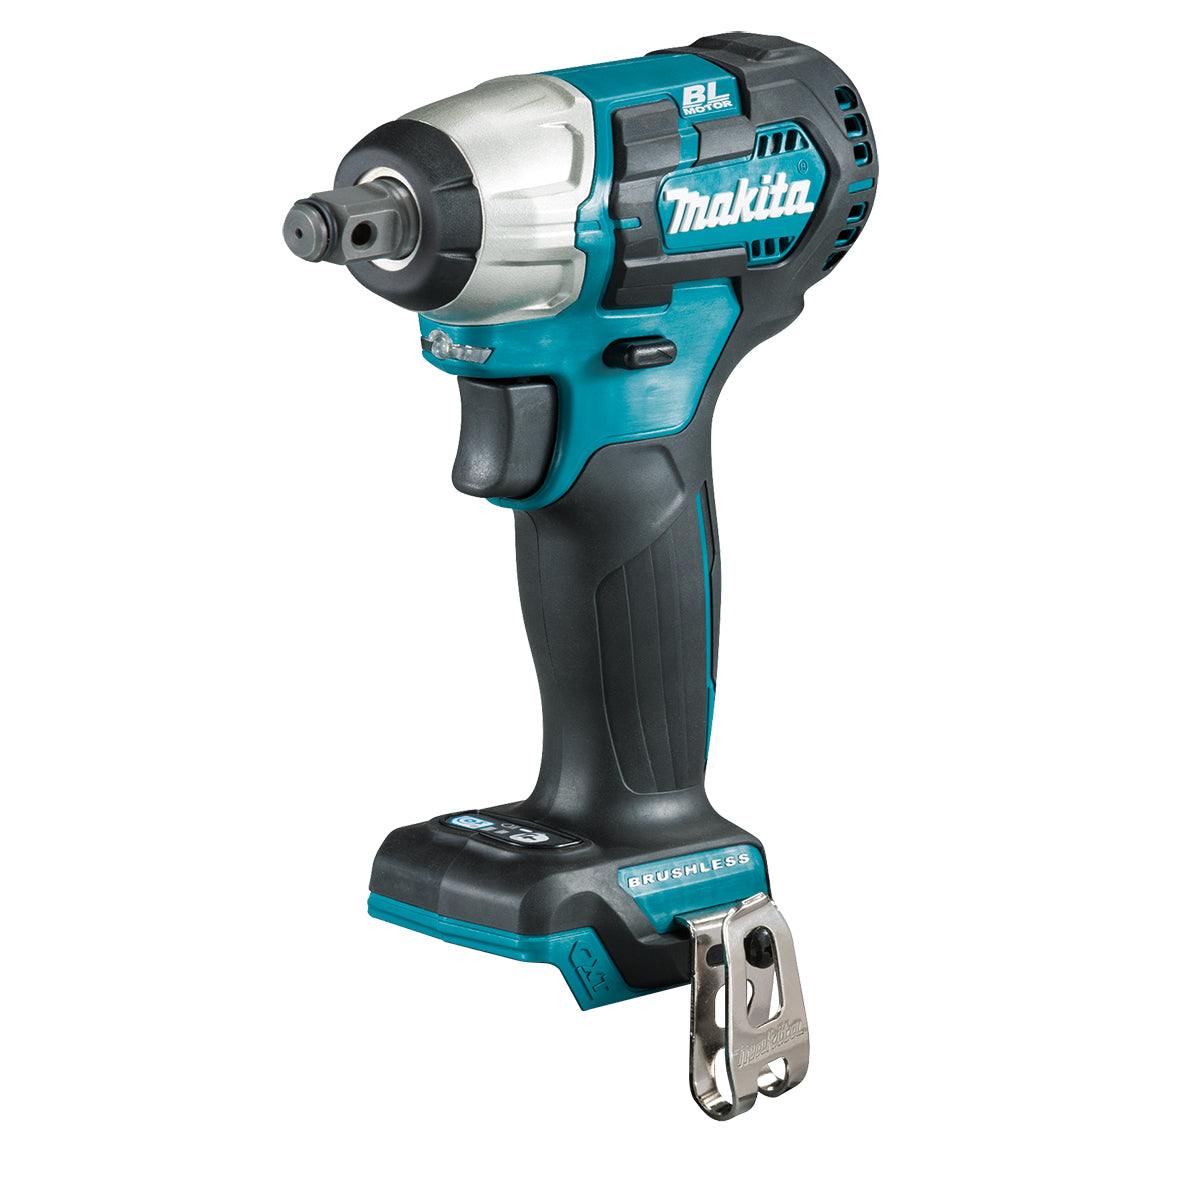 12V 1/2" Brushless Impact Wrench Bare (Tool Only) TW161DZ by Makita